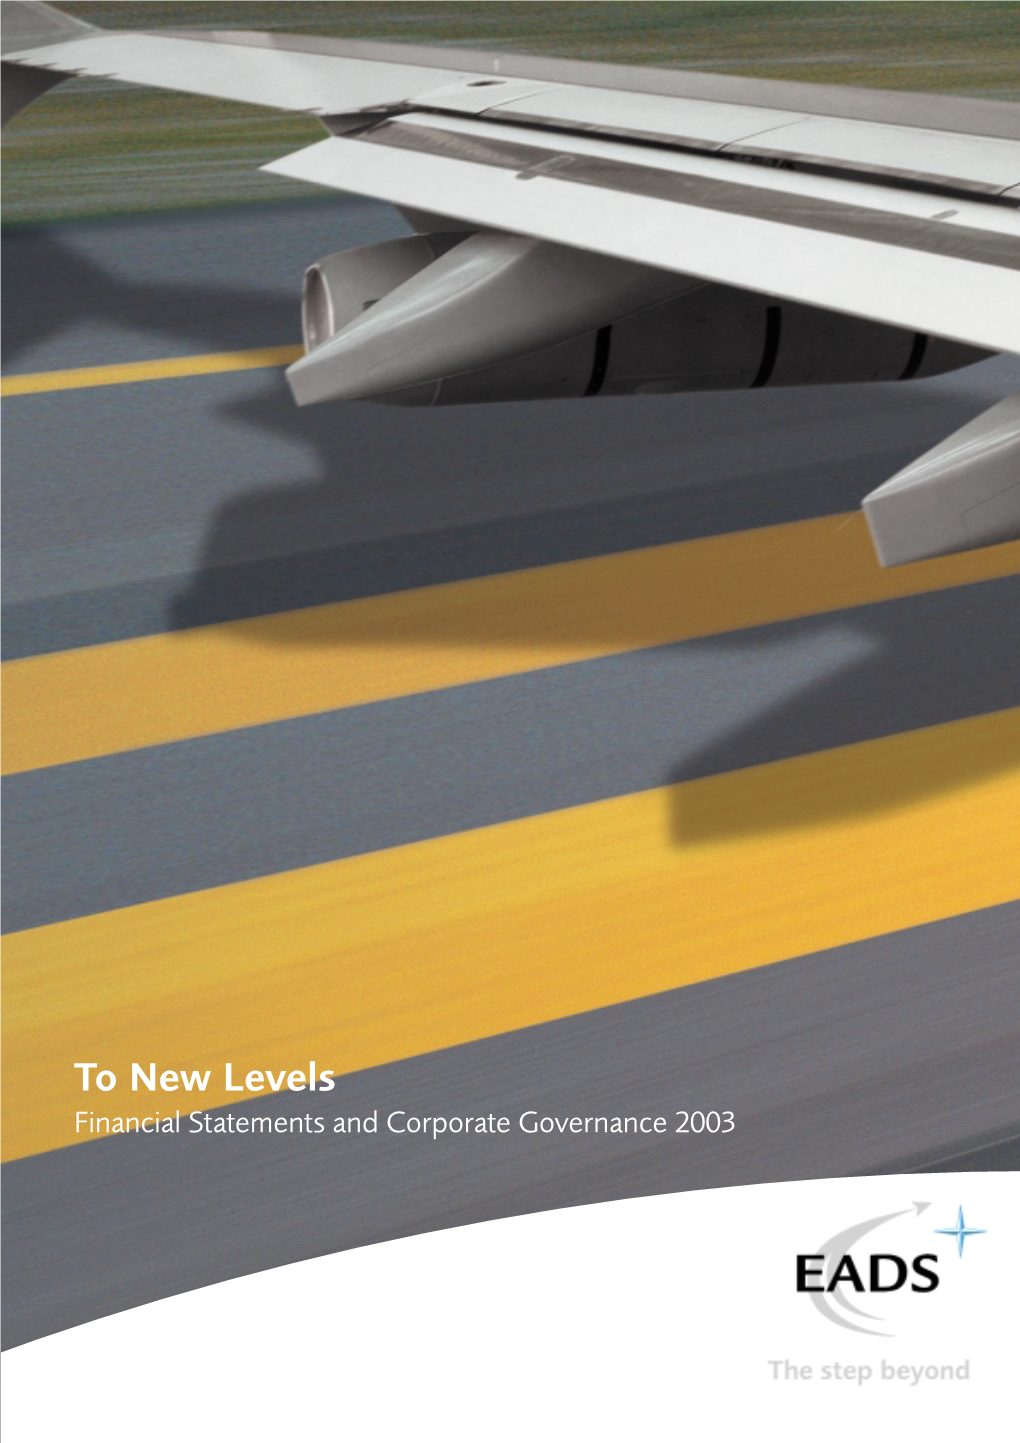 To New Levels Financial Statements and Corporate Governance 2003 BOOK2-790-B 29 MARCH 2004